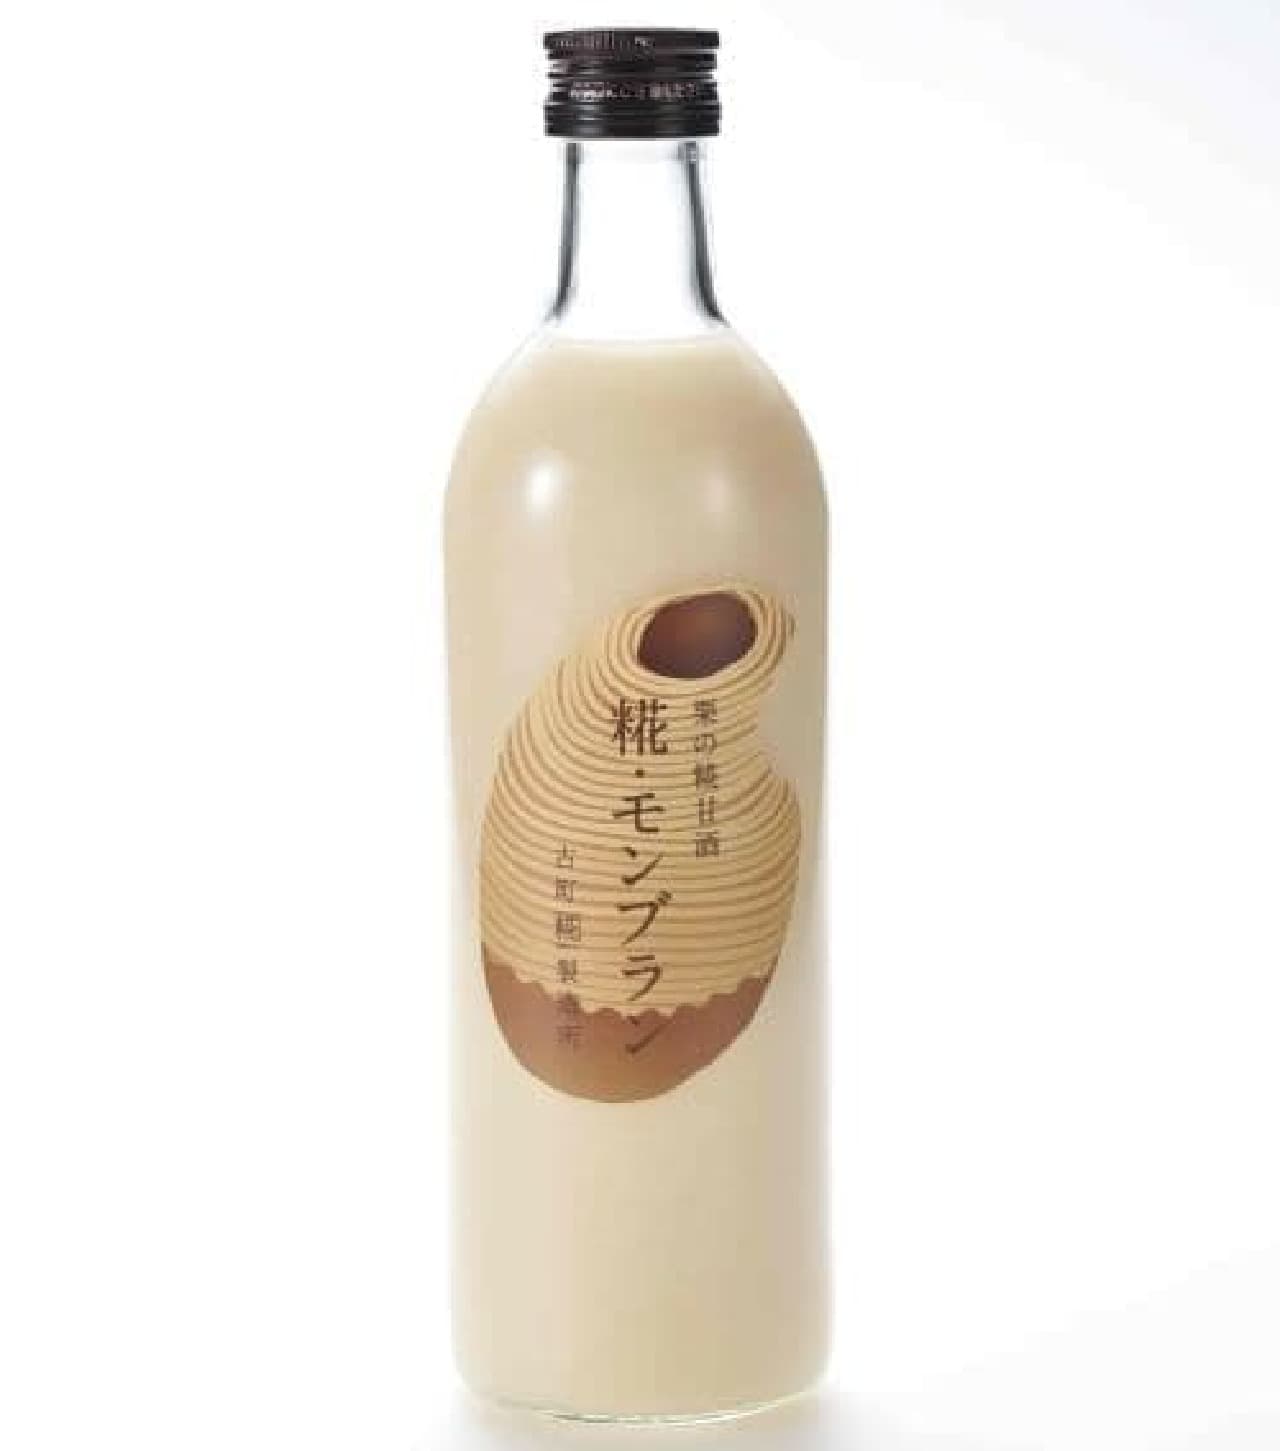 "Jiuqu Mont Blanc" is a drink that expresses "Mont Blanc", which is called the king of autumn sweets, with amazake of Jiuqu.